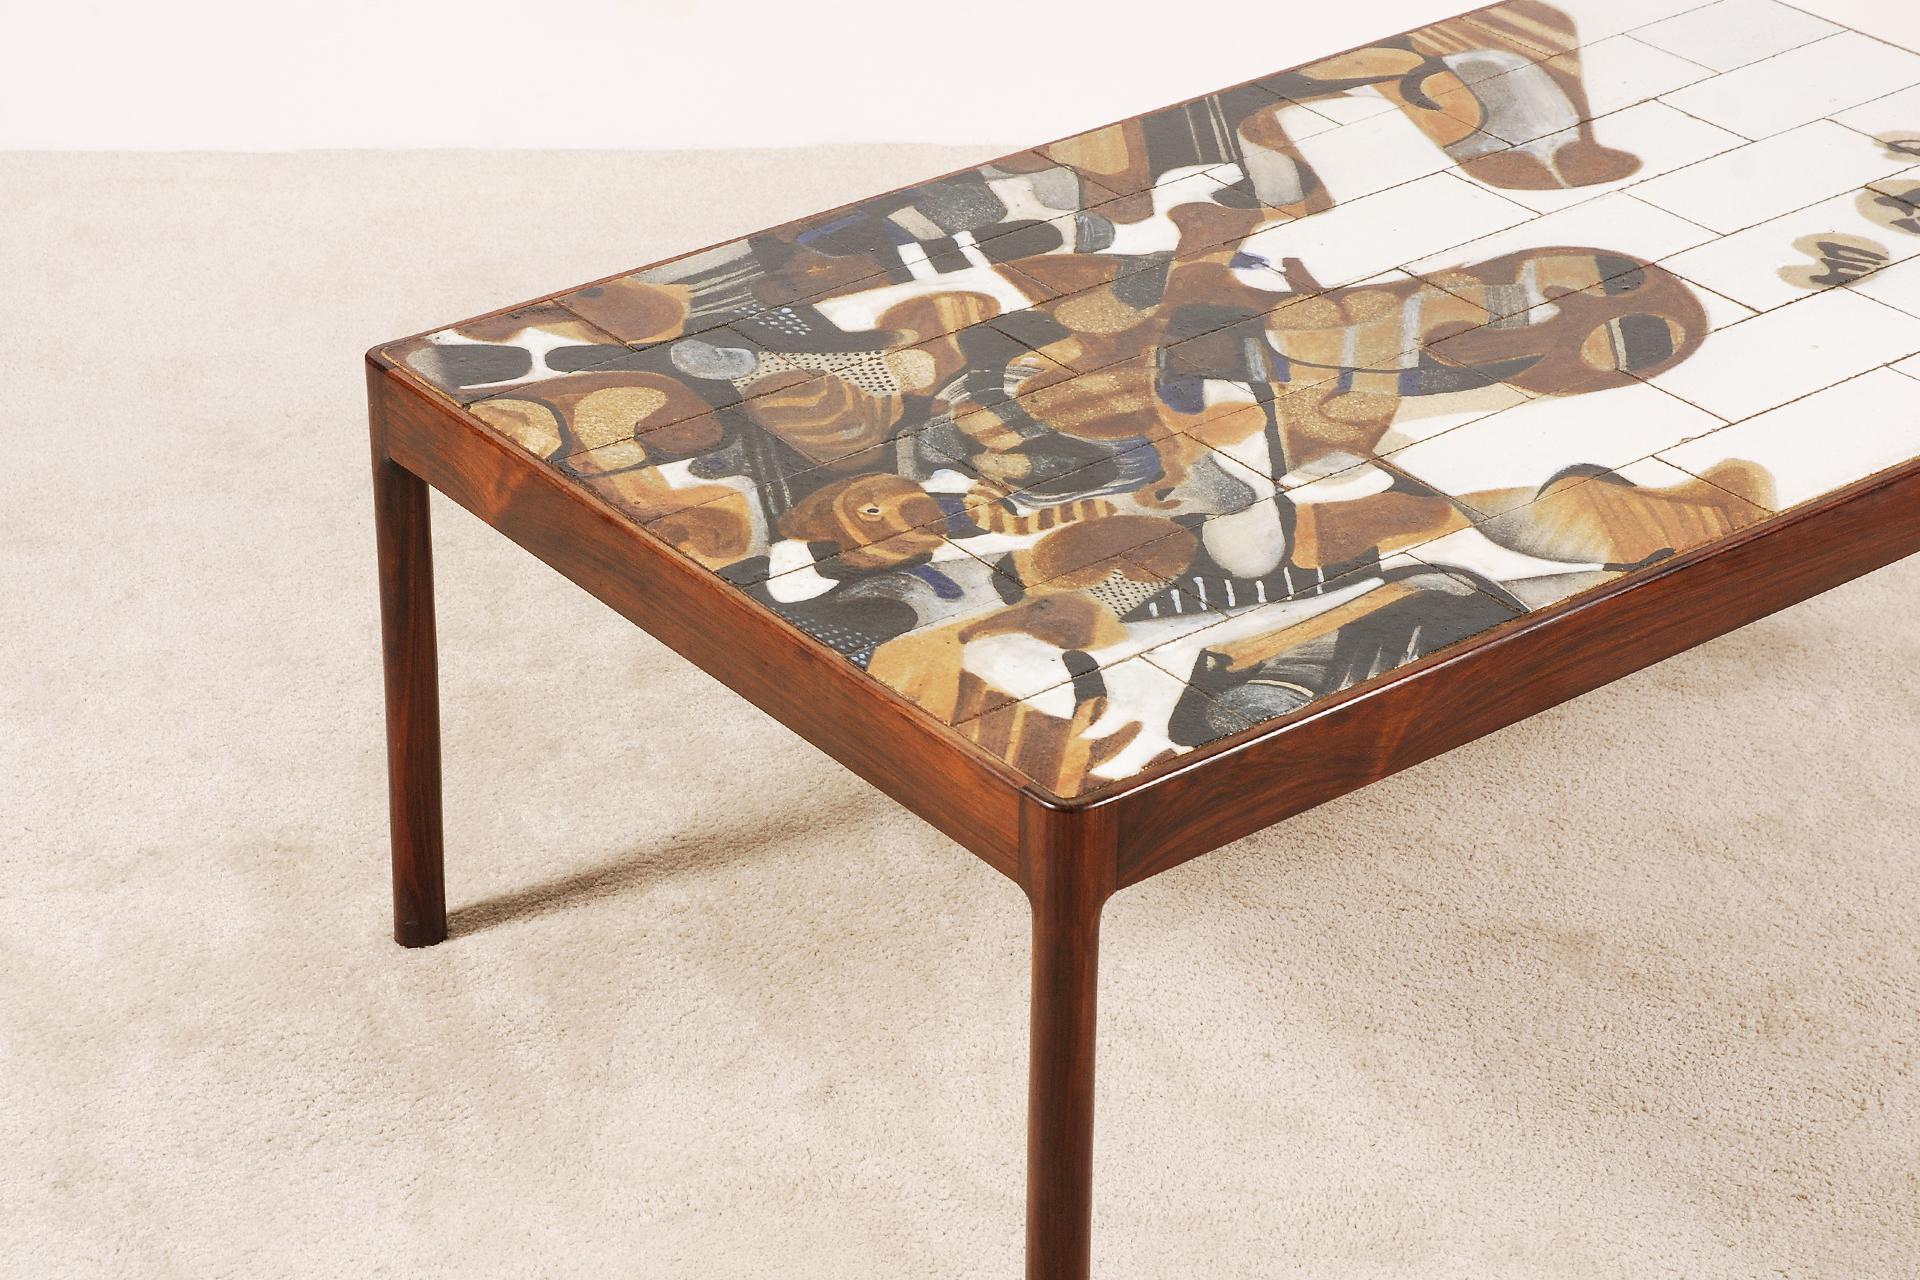 Large coffee table designed by the Danish artist Jeppe Hagedorn-Olsen, circa 1960.
The top is made of ceramic tiles and the frame is in rosewood.
Excellent condition.